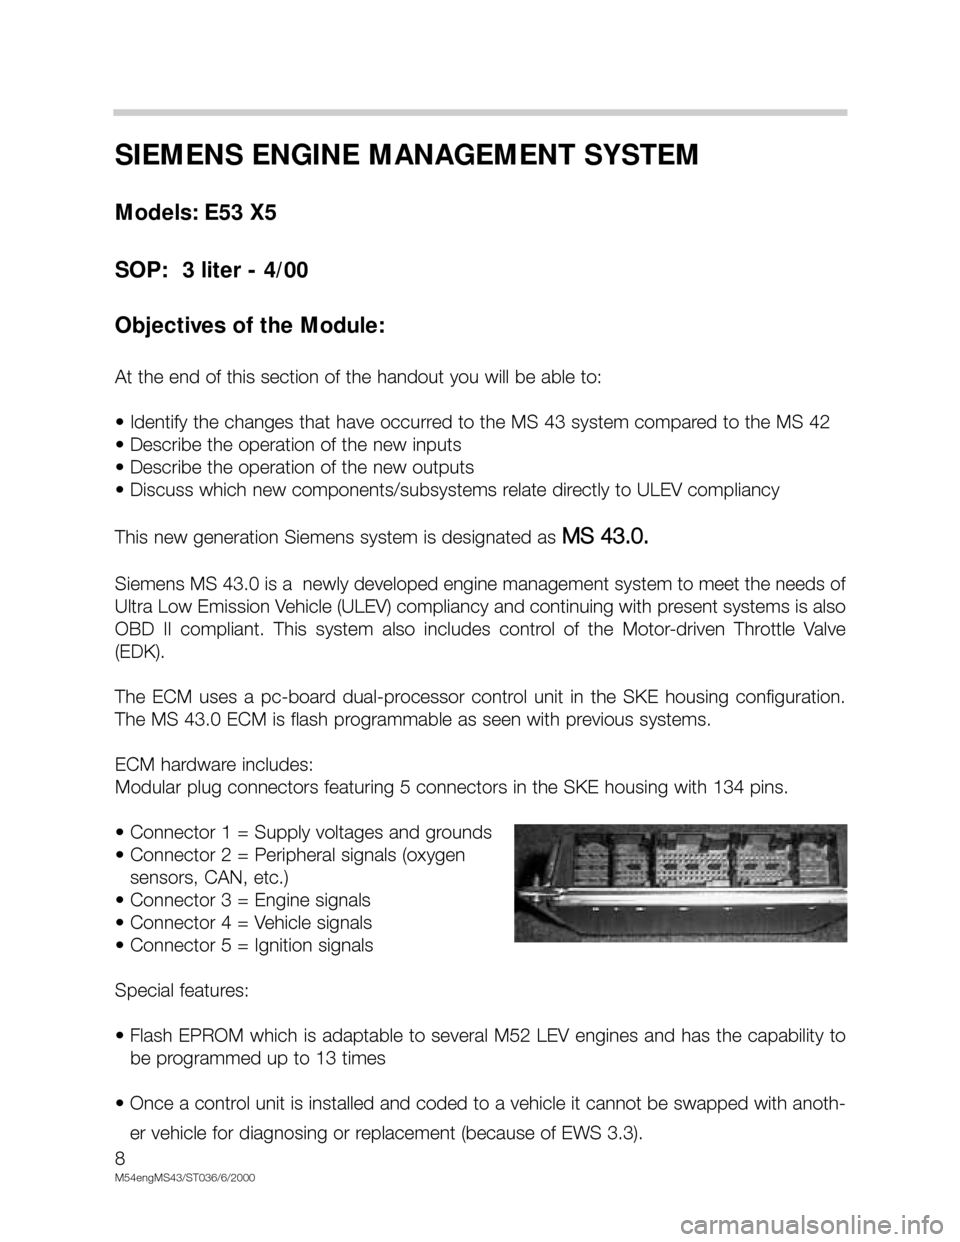 BMW X5 2003 E53 M54 Engine Workshop Manual 8
M54engMS43/ST036/6/2000
SIEMENS ENGINE MANAGEMENT SYSTEM
Models: E53 X5
SOP:  3 liter - 4/00
Objectives of the Module:
At the end of this section of the handout you will be able to:
• Identify the